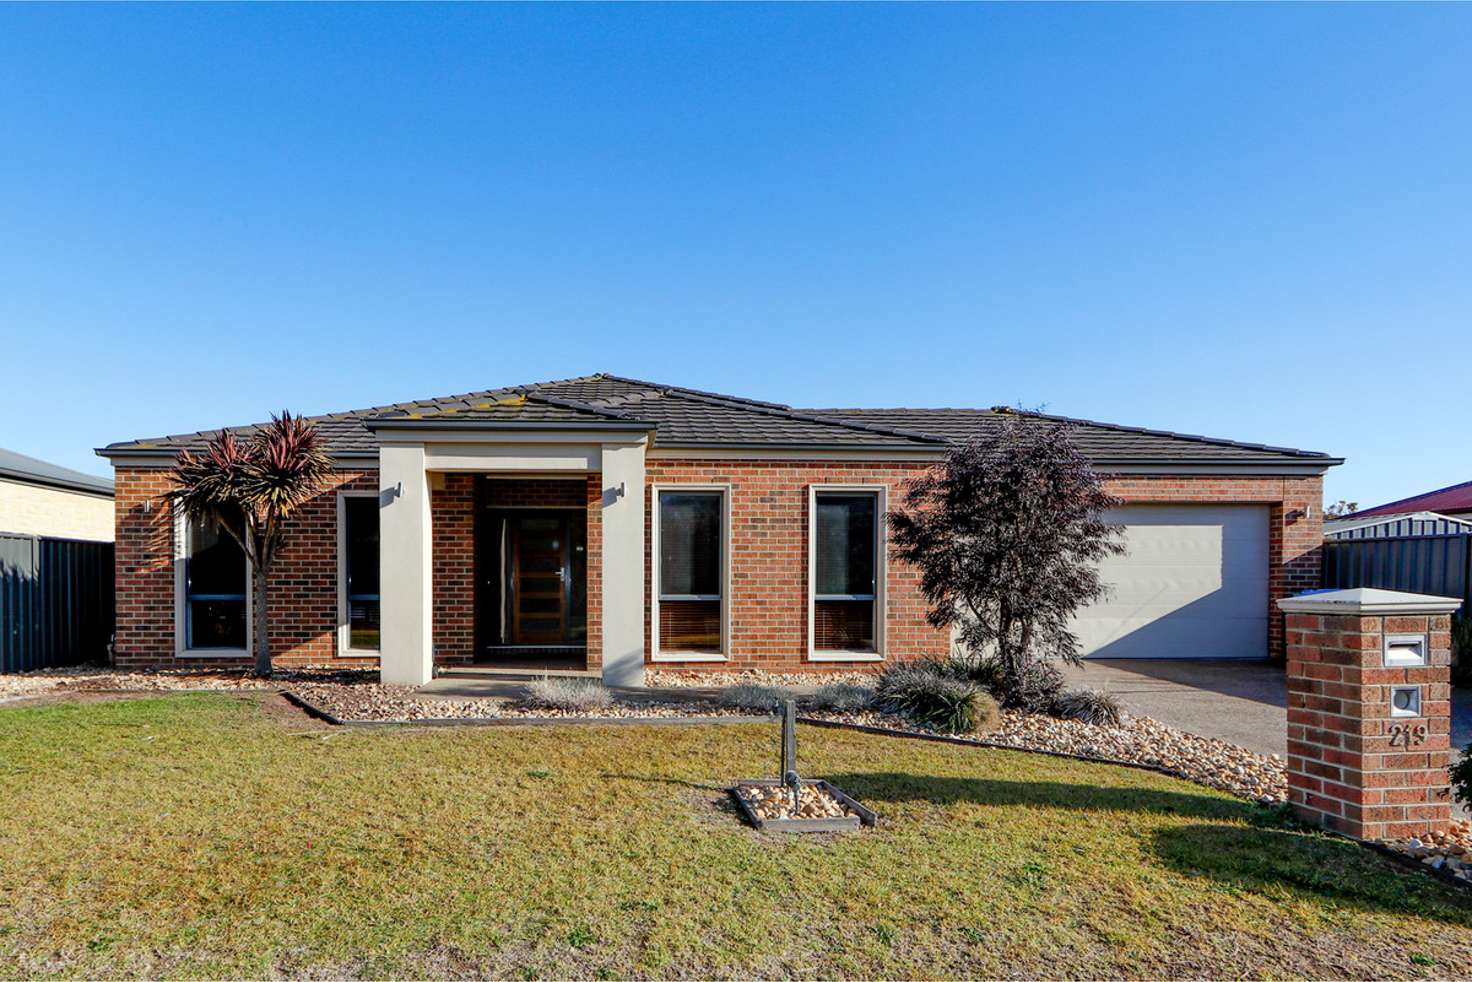 Main view of Homely house listing, 219 Somerton Park Road, Sale VIC 3850